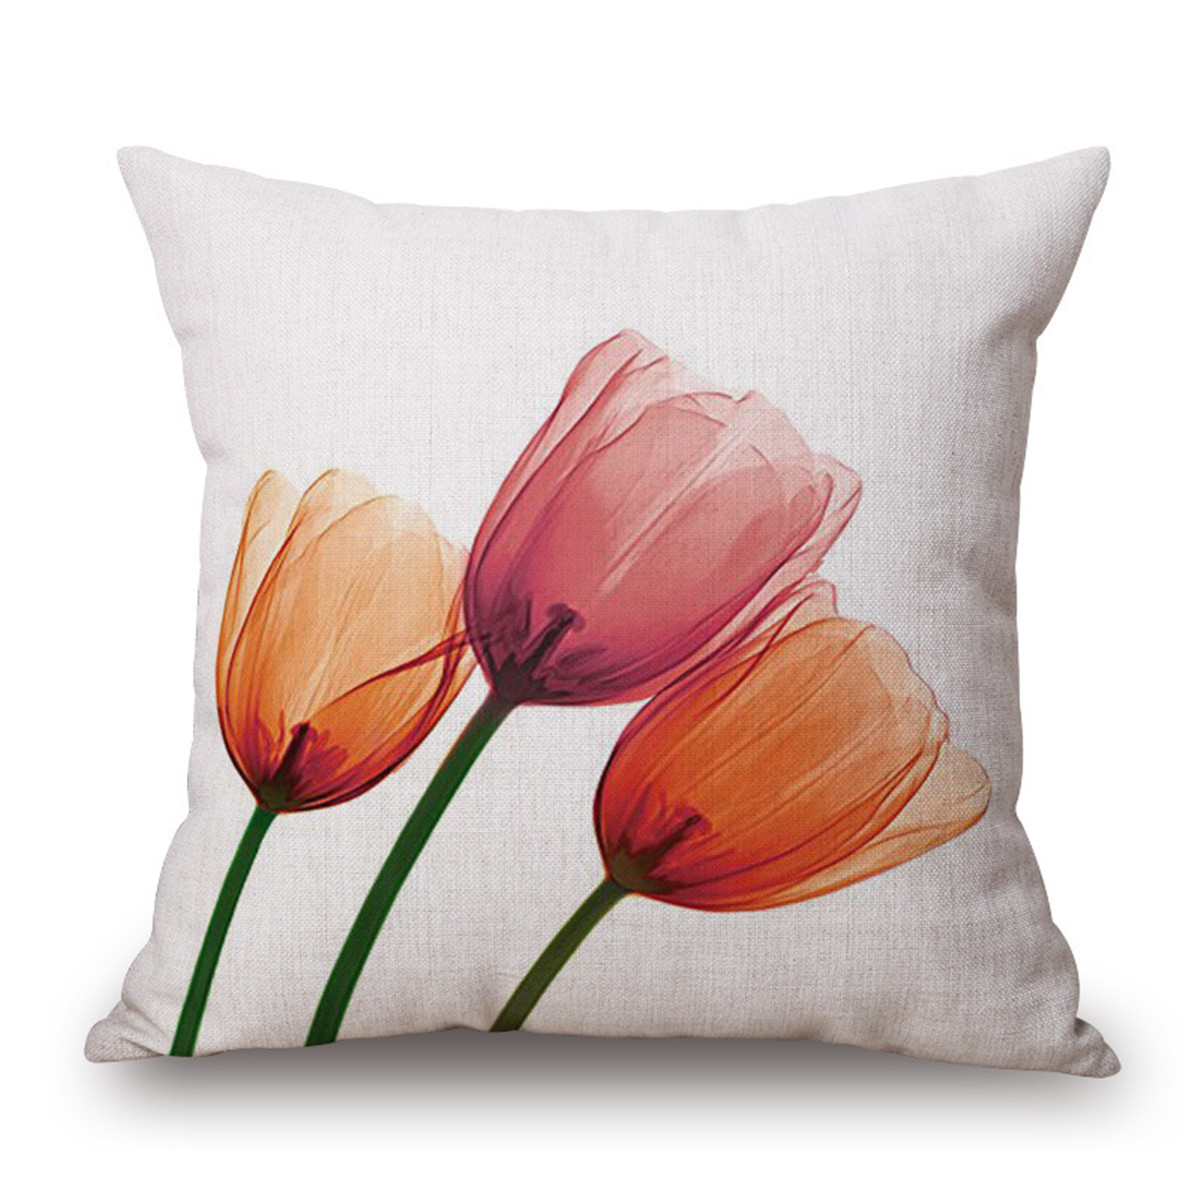 Ink-Painting-Flowers-Cotton-Linen-Pillow-Case-Tulips-Sofa-Cushion-Cover-45x45cm-1161674-9